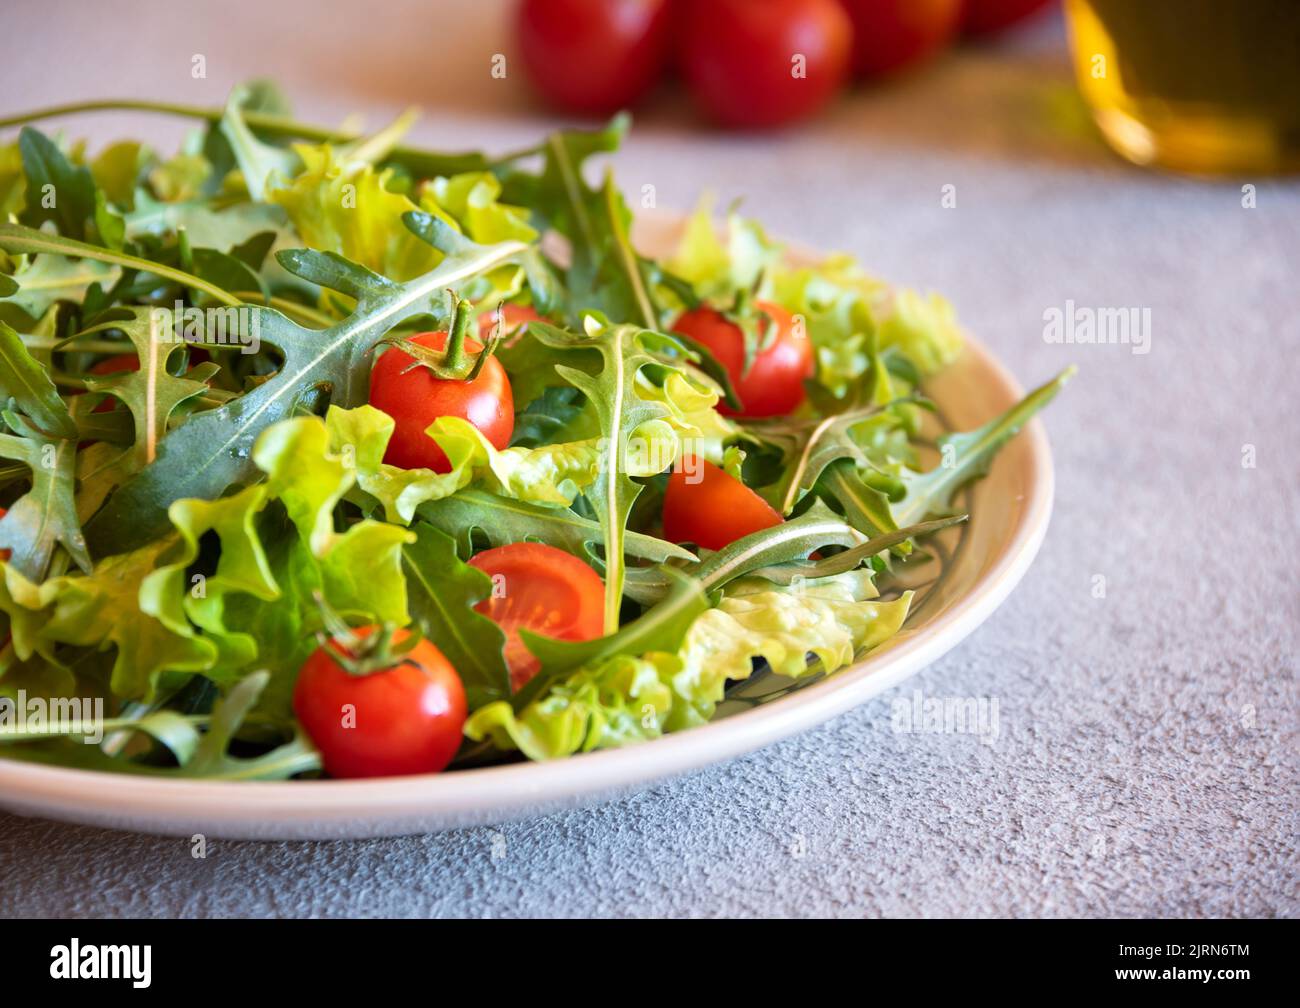 Fresh vegetables salad with tomatoes, arugola, lettuce and other ingredients, healthy food Stock Photo